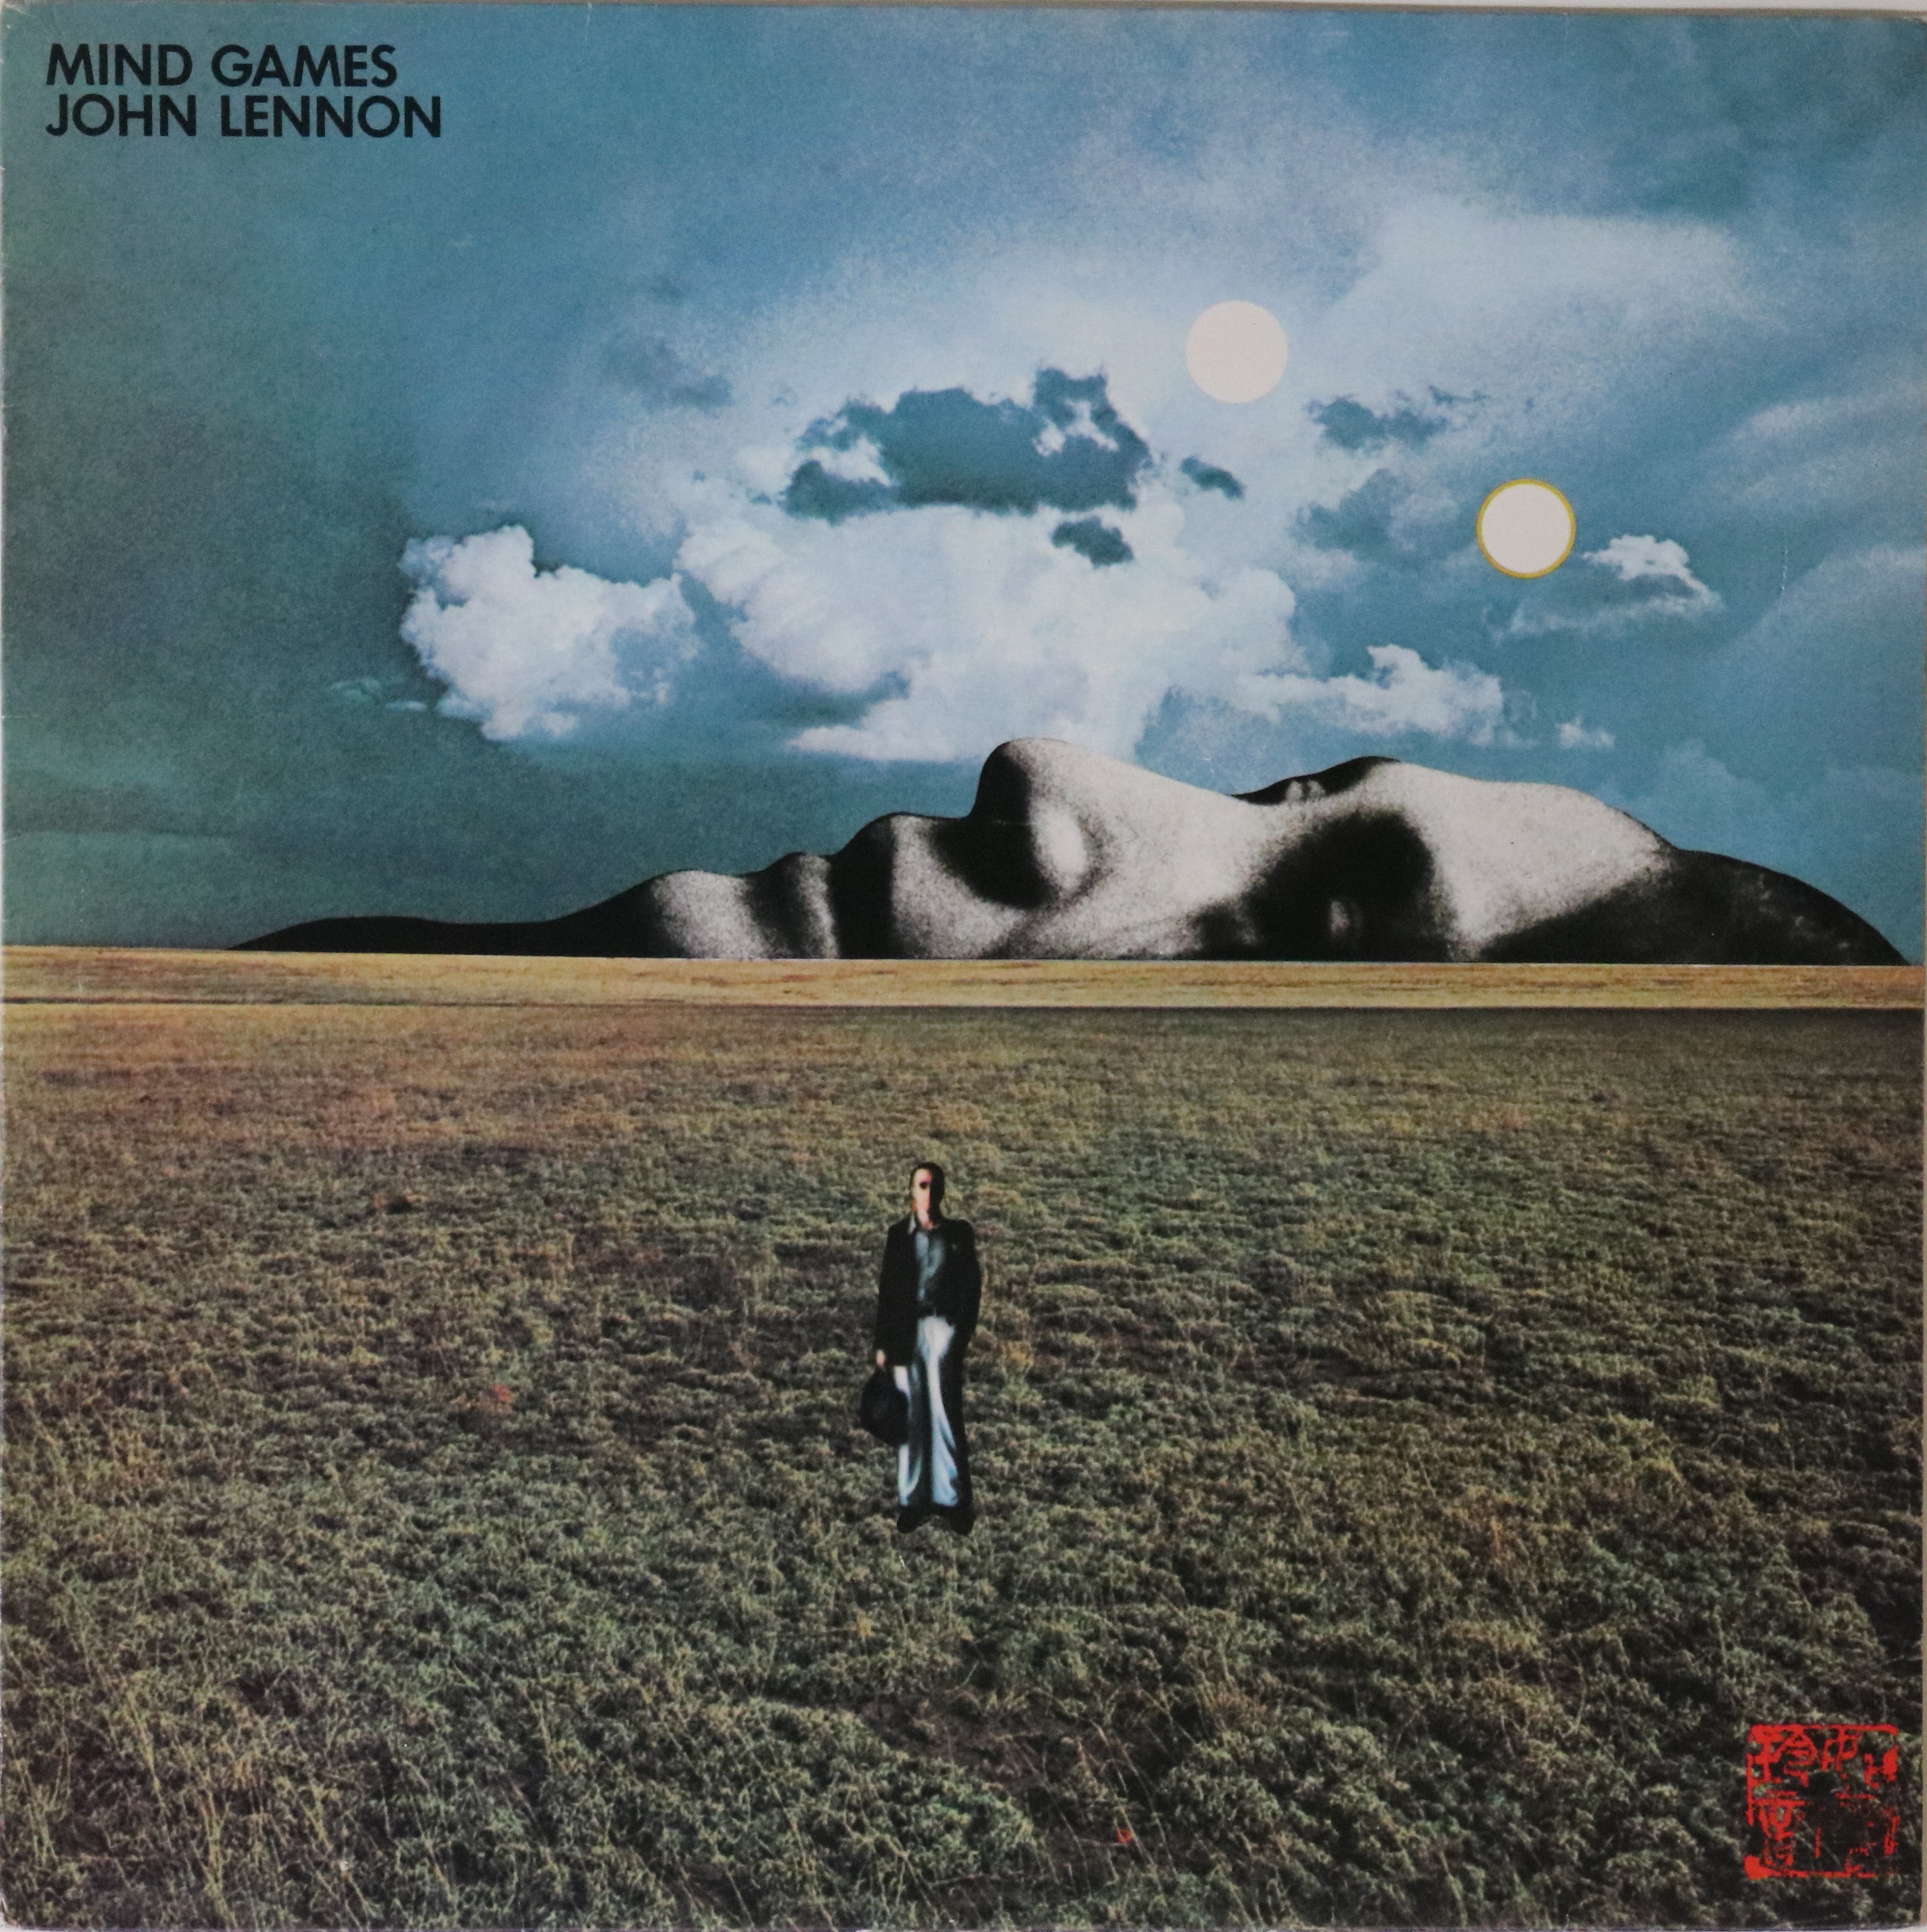 JOHN LENNON - MIND GAMES LP (PCS 7165) - WITH FRESH FROM APPLE FLYERS.